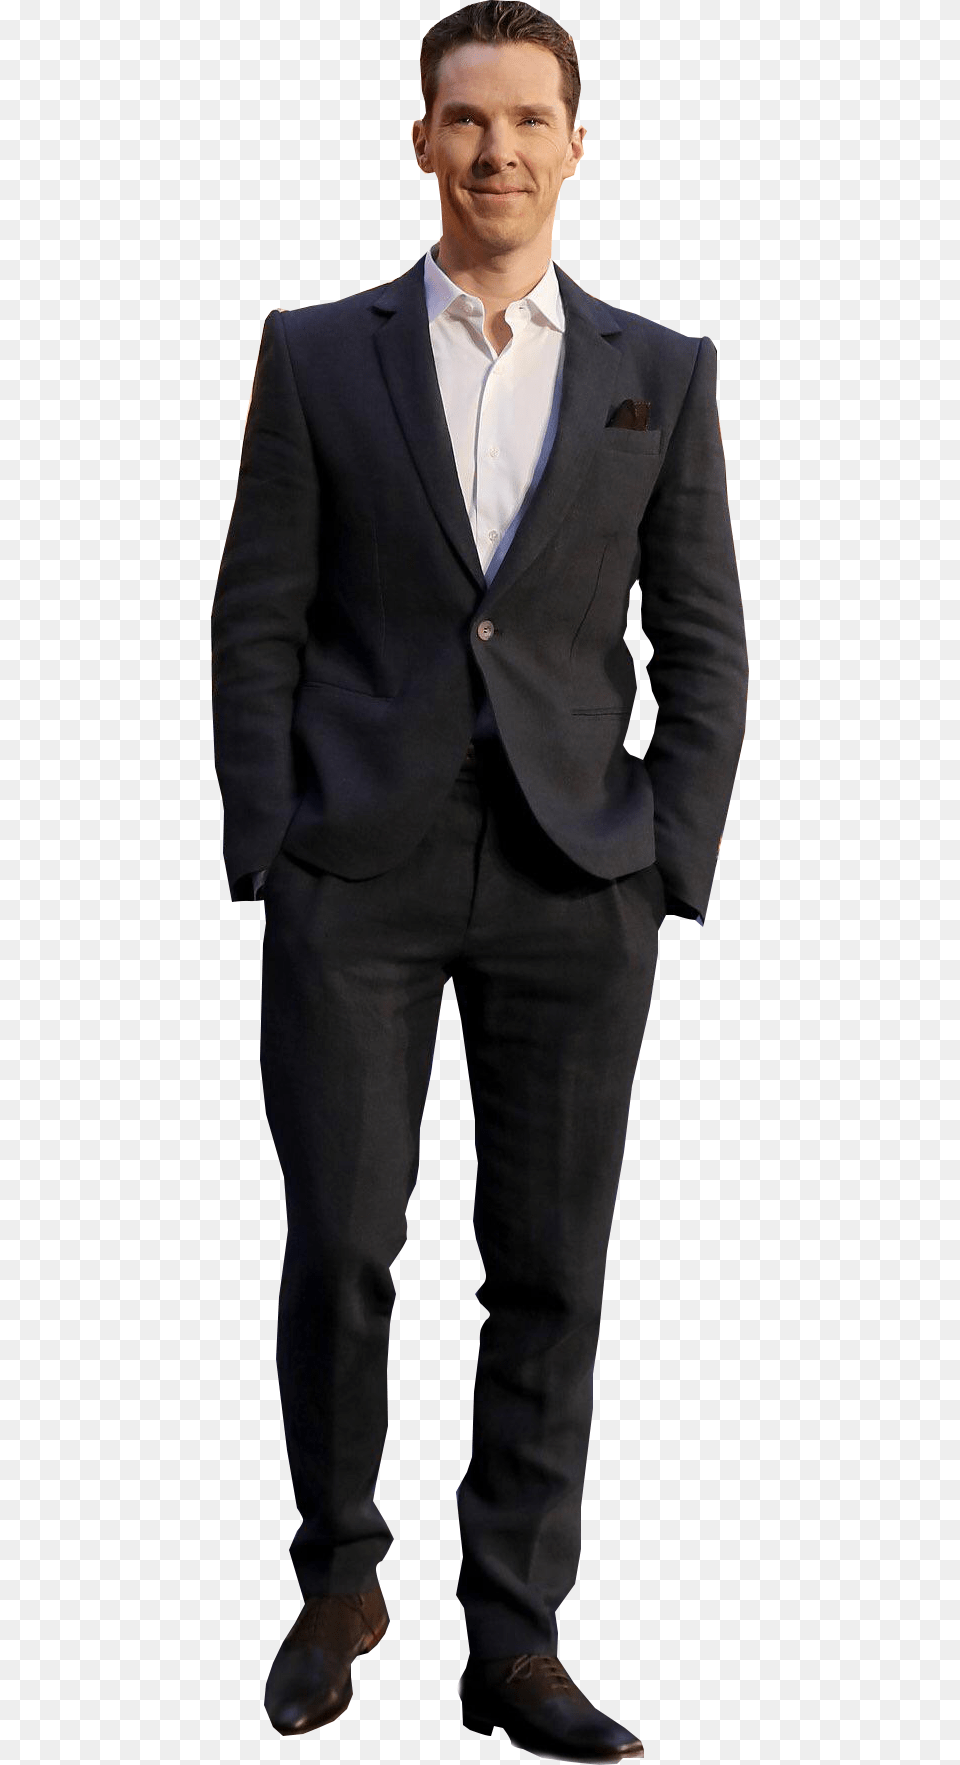 Tuxedo, Clothing, Formal Wear, Suit, Adult Png Image